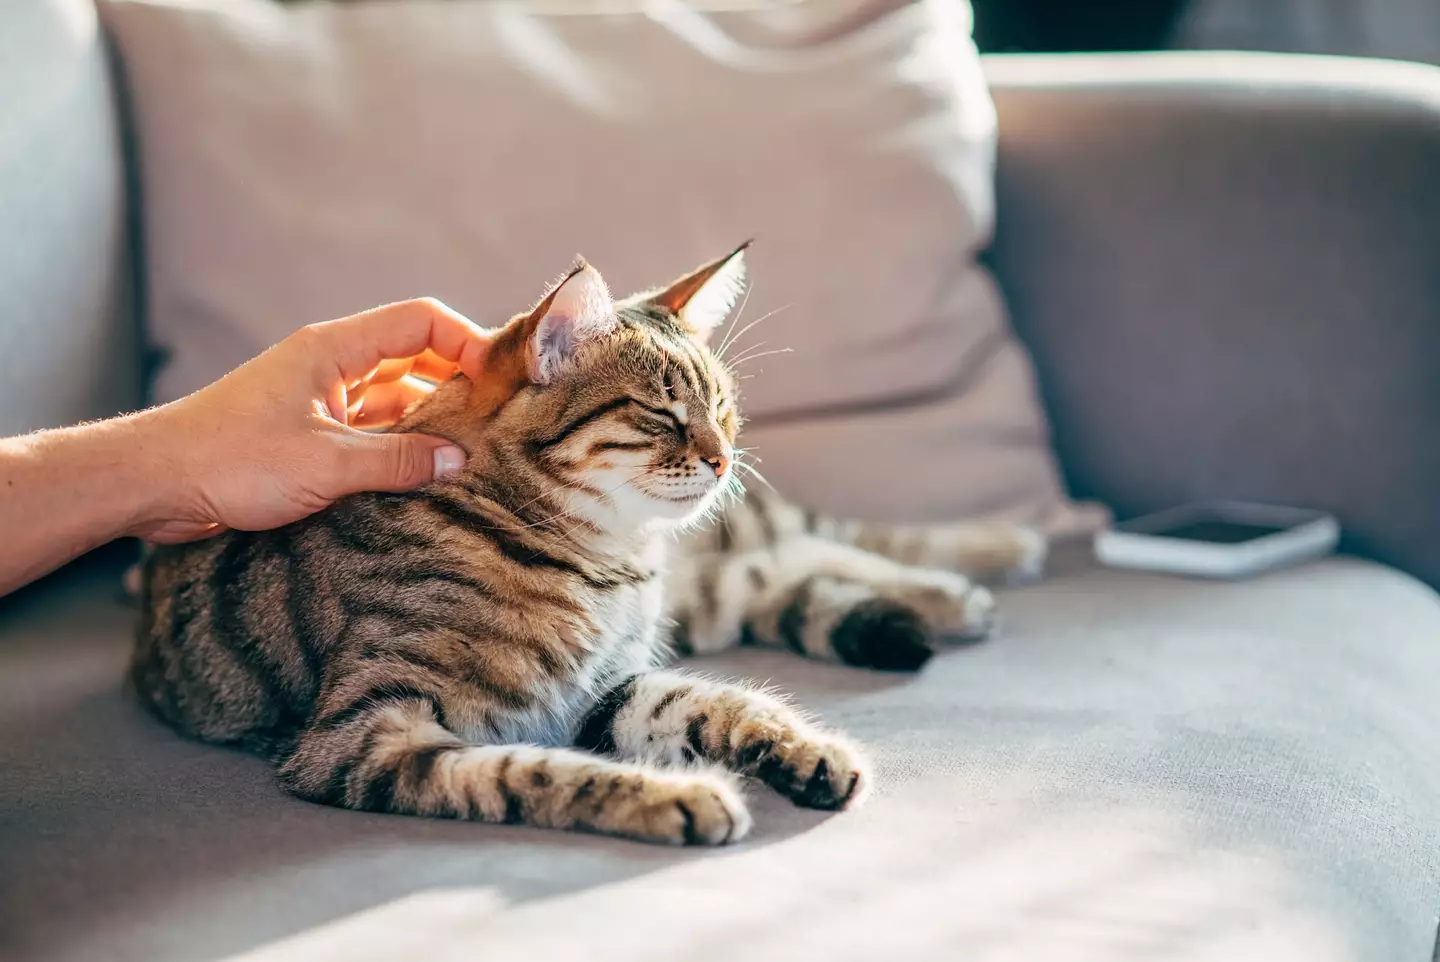 All cats need to be microchipped by next month (10 June). (Kseniya Ovchinnikova / Getty Images)